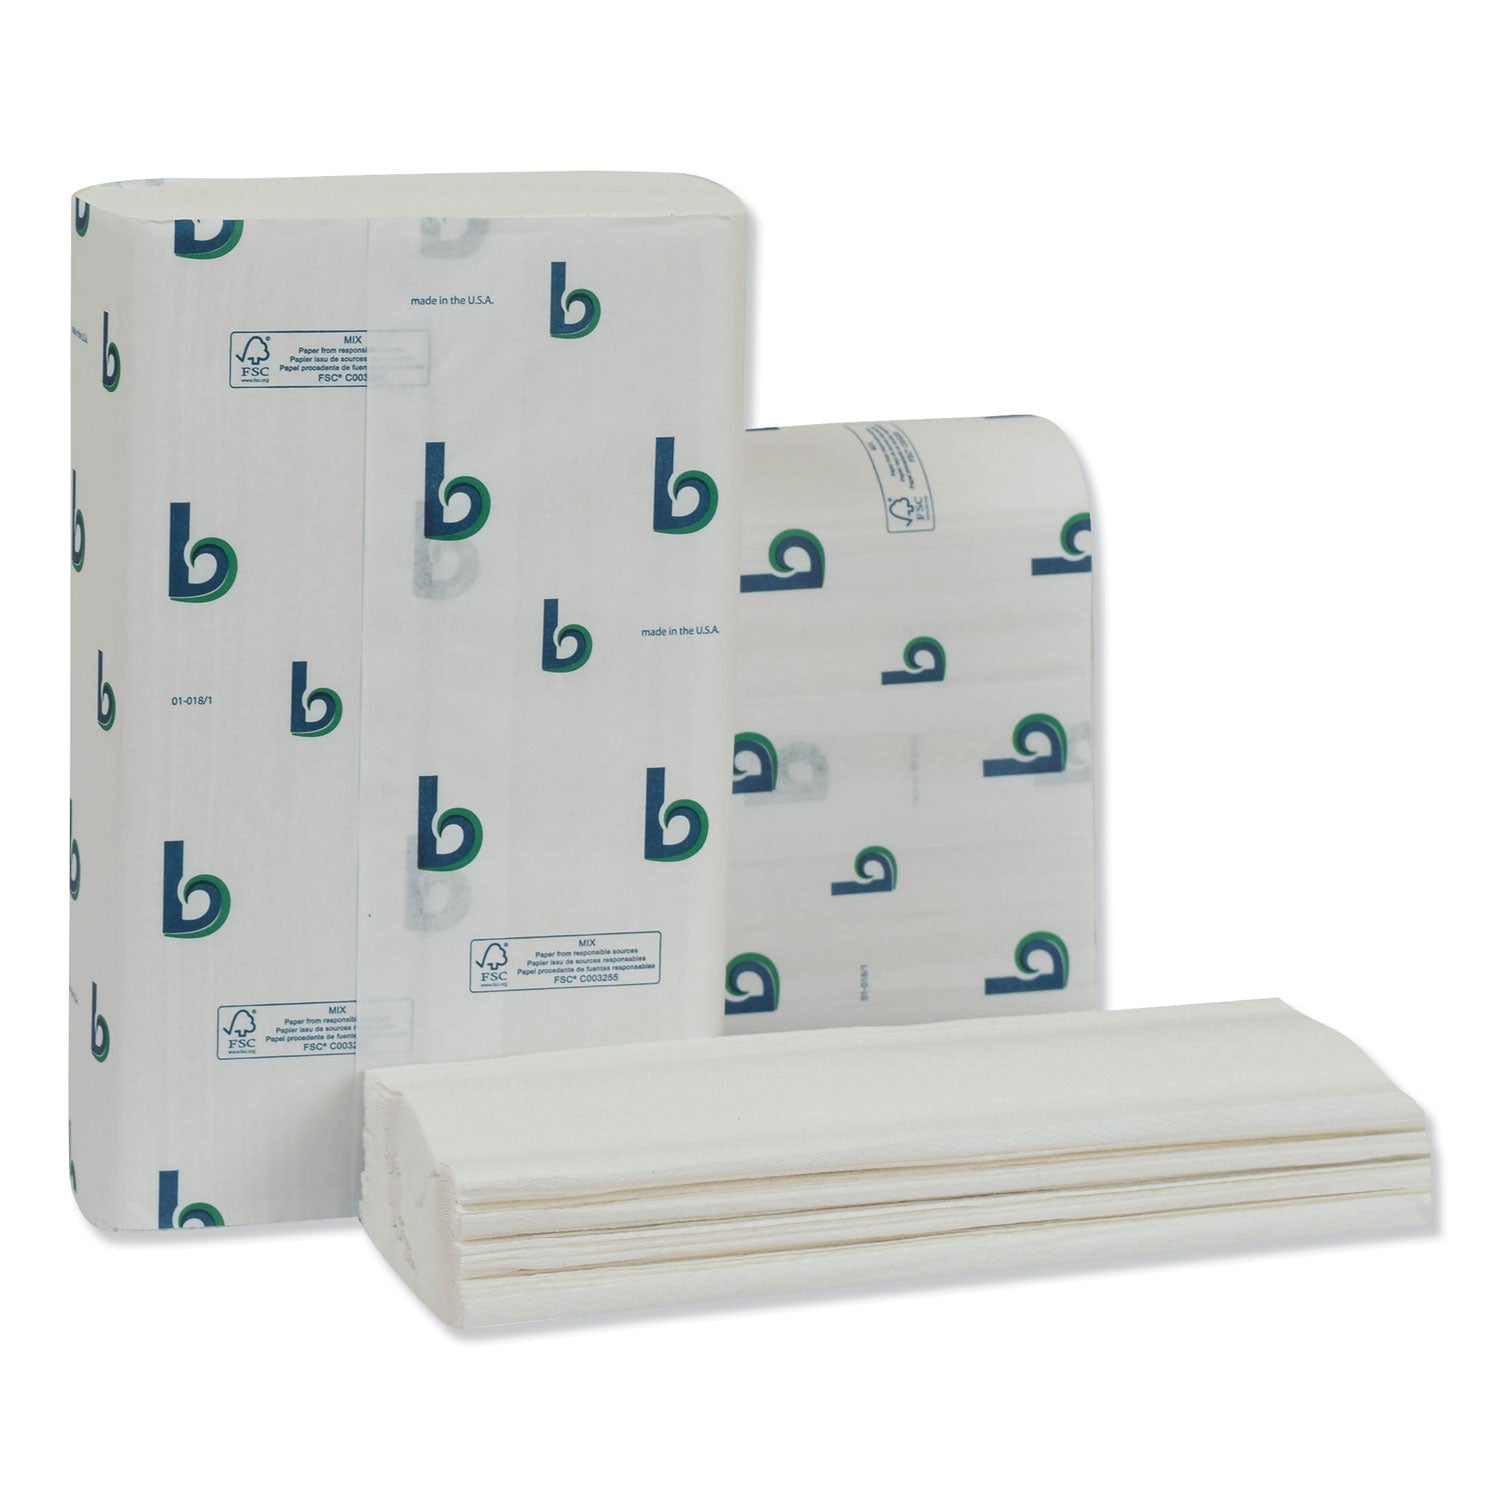 structured-multifold-towels-1-ply-9-x-95-white-250-pack-16-packs-carton_bwk6204 - 1